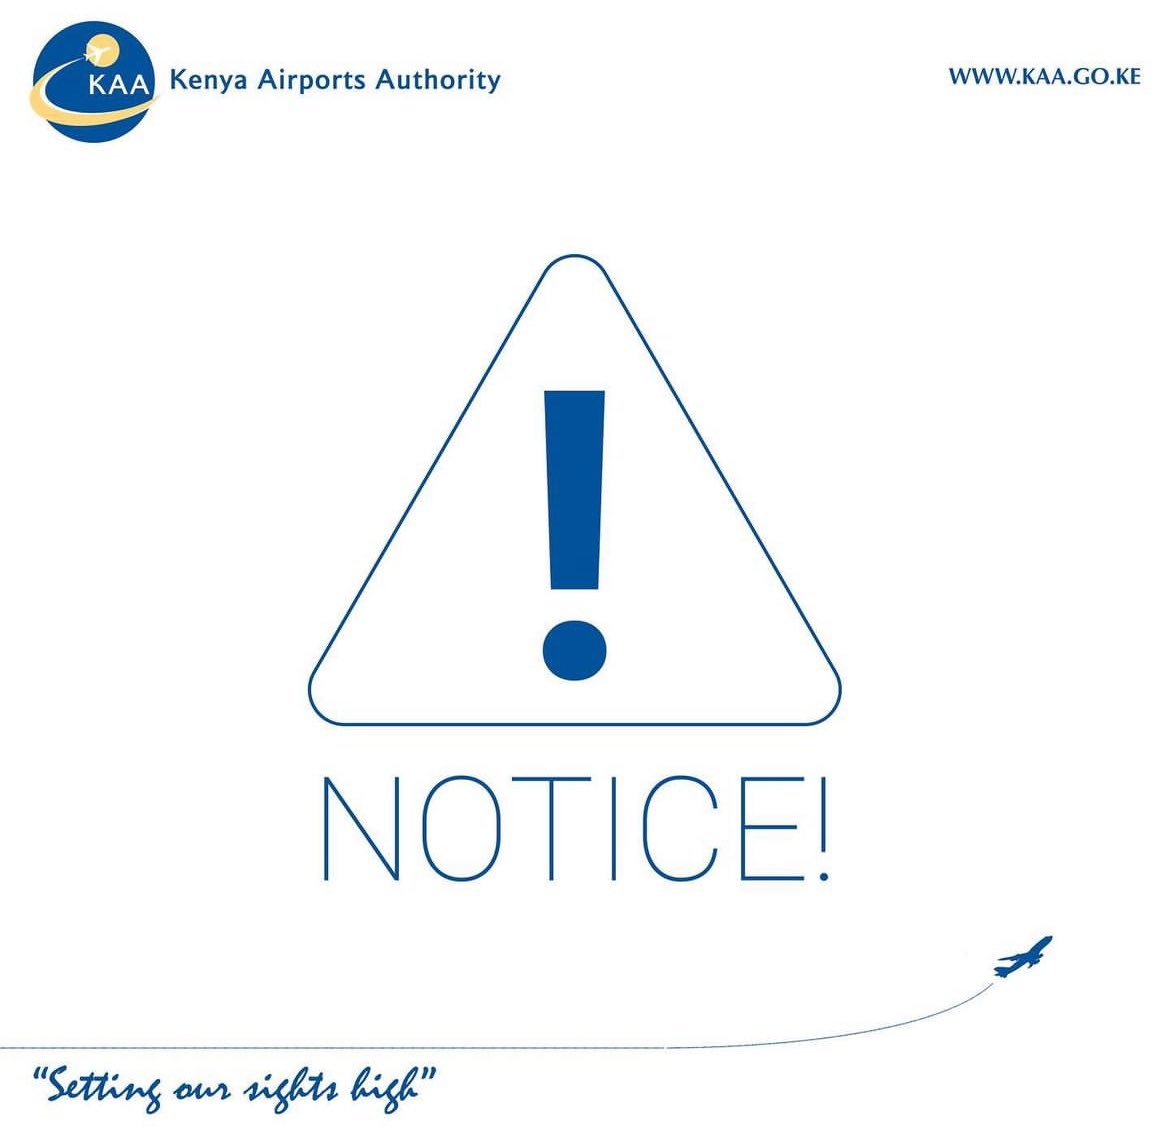 🚨 PASSENGER NOTICE! Due to heavy traffic affecting sections of Mombasa Road this evening, we advise passengers to plan ahead, arrive at the airport early to avoid any potential delays in catching their flights. Your safety & convenience are our top priorities. Safe travels!